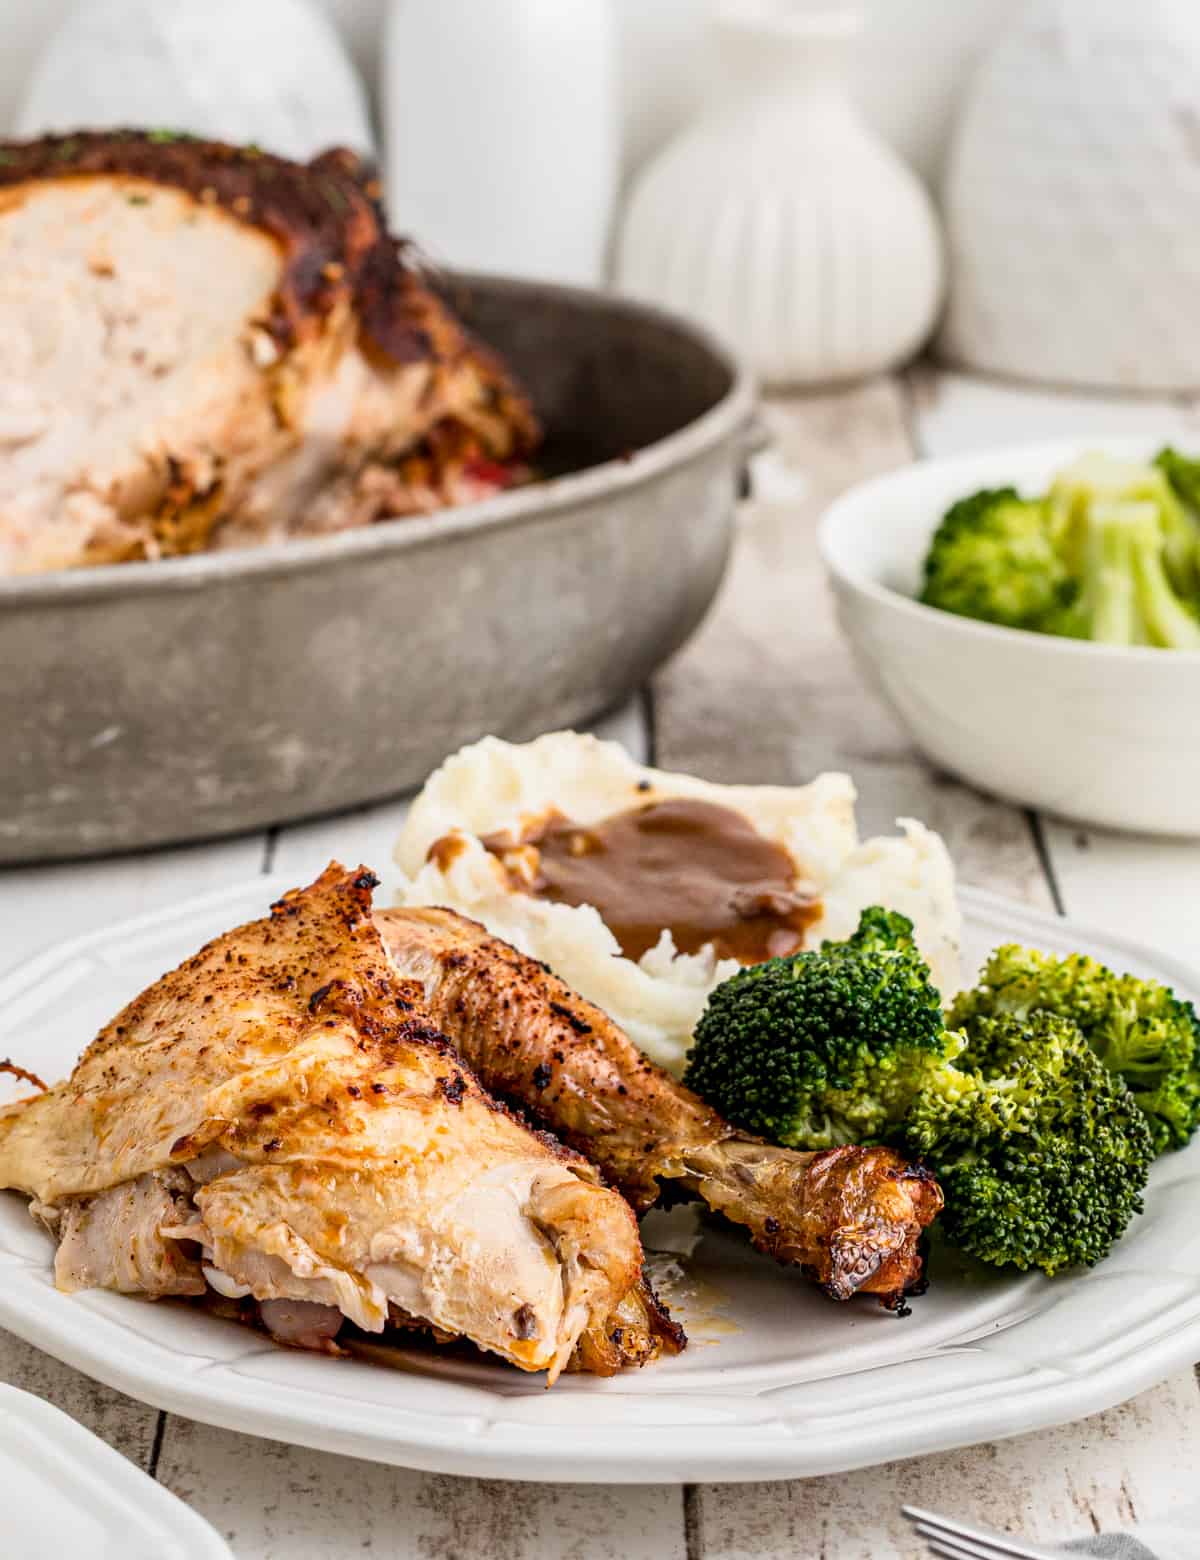 Plate of a piece of chicken, potatoes and broccoli with whole chicken in background.